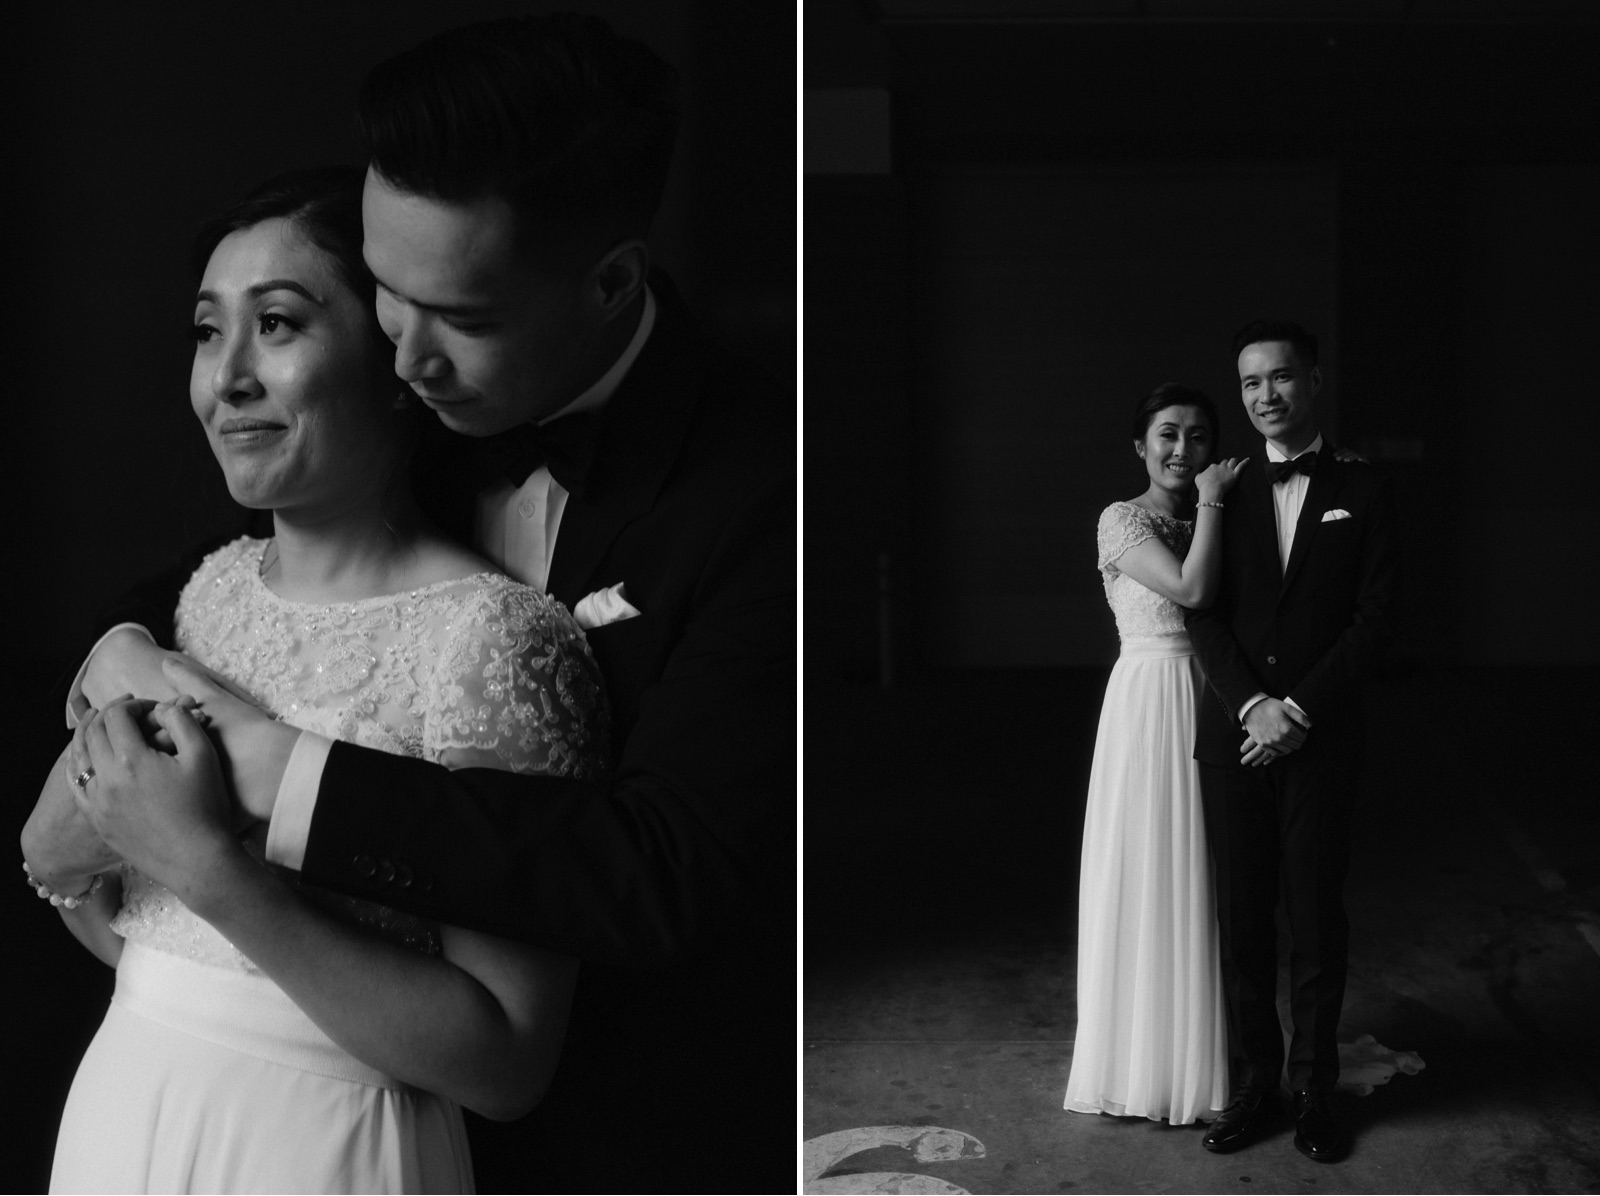 Moody bride and groom portraits in industrial downtown Calgary